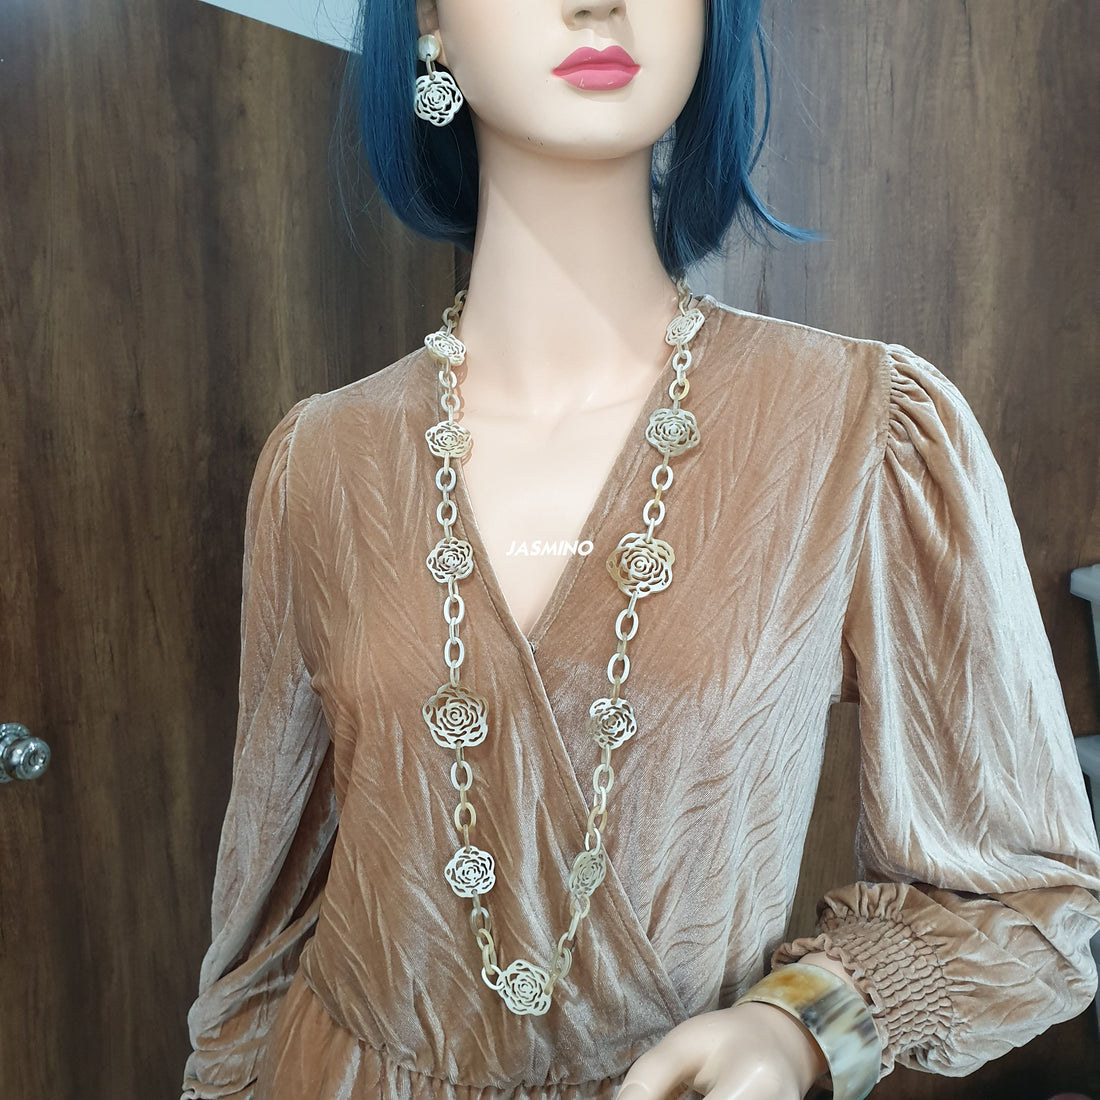 Minimalist white floral drop earrings and chain link necklace on mannequin